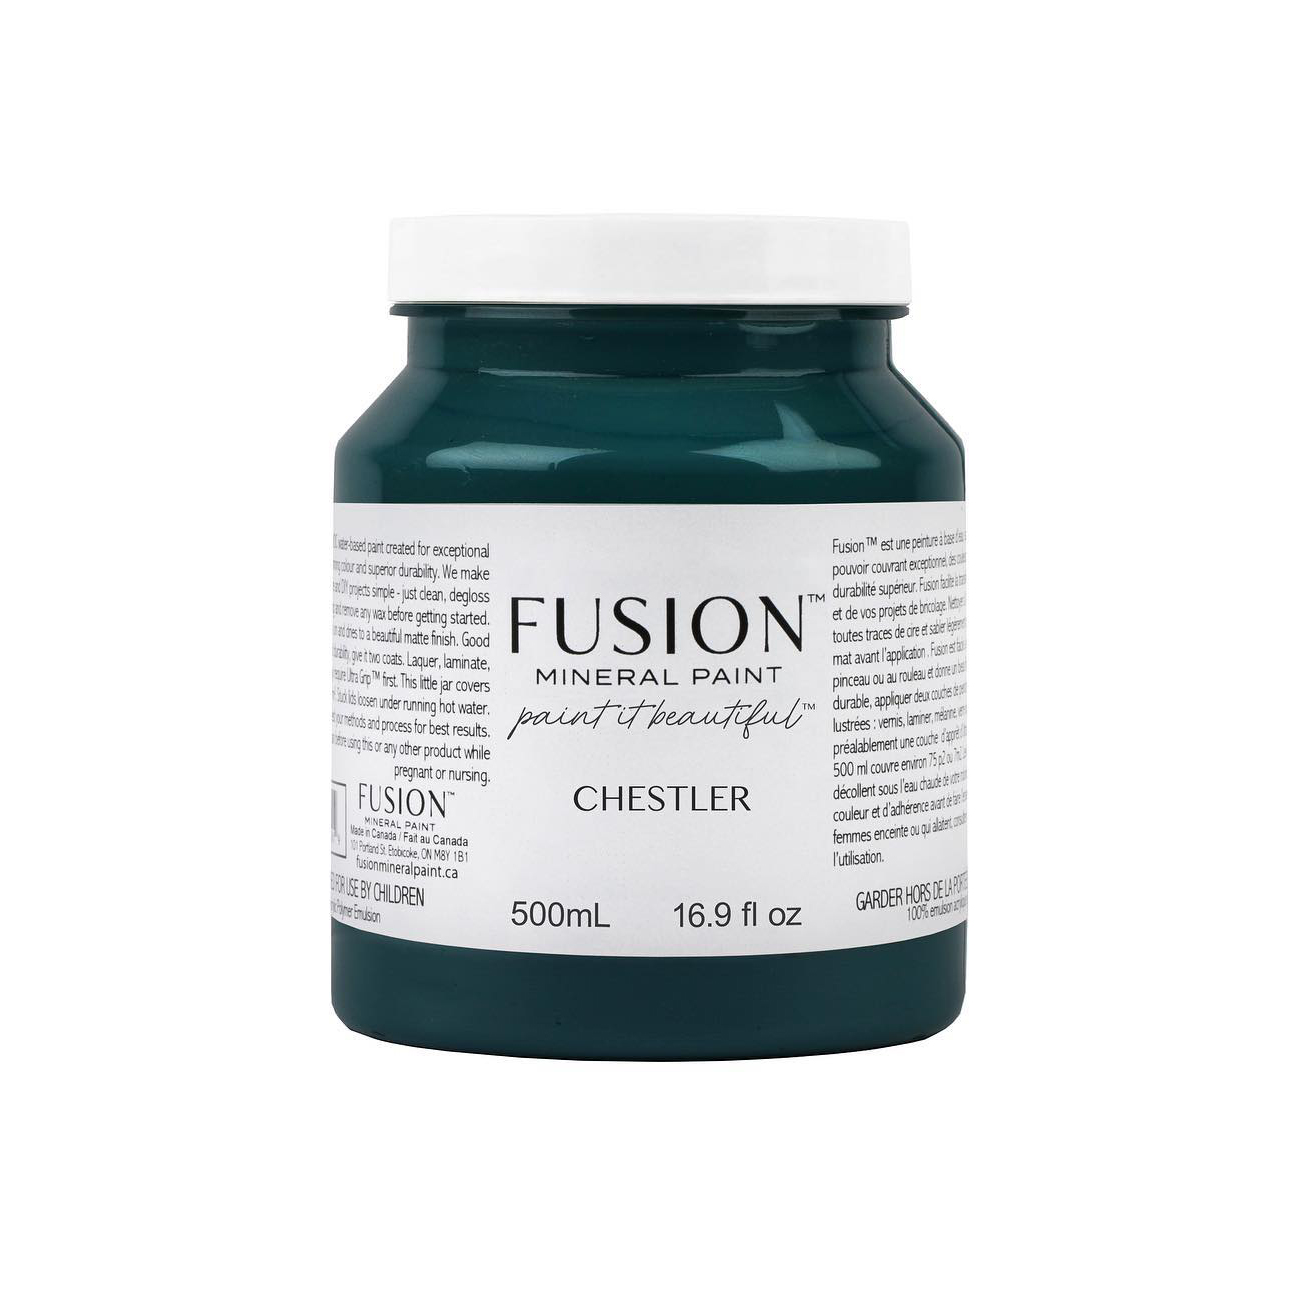 FUSION Mineral Paint - Chestler - 500ml